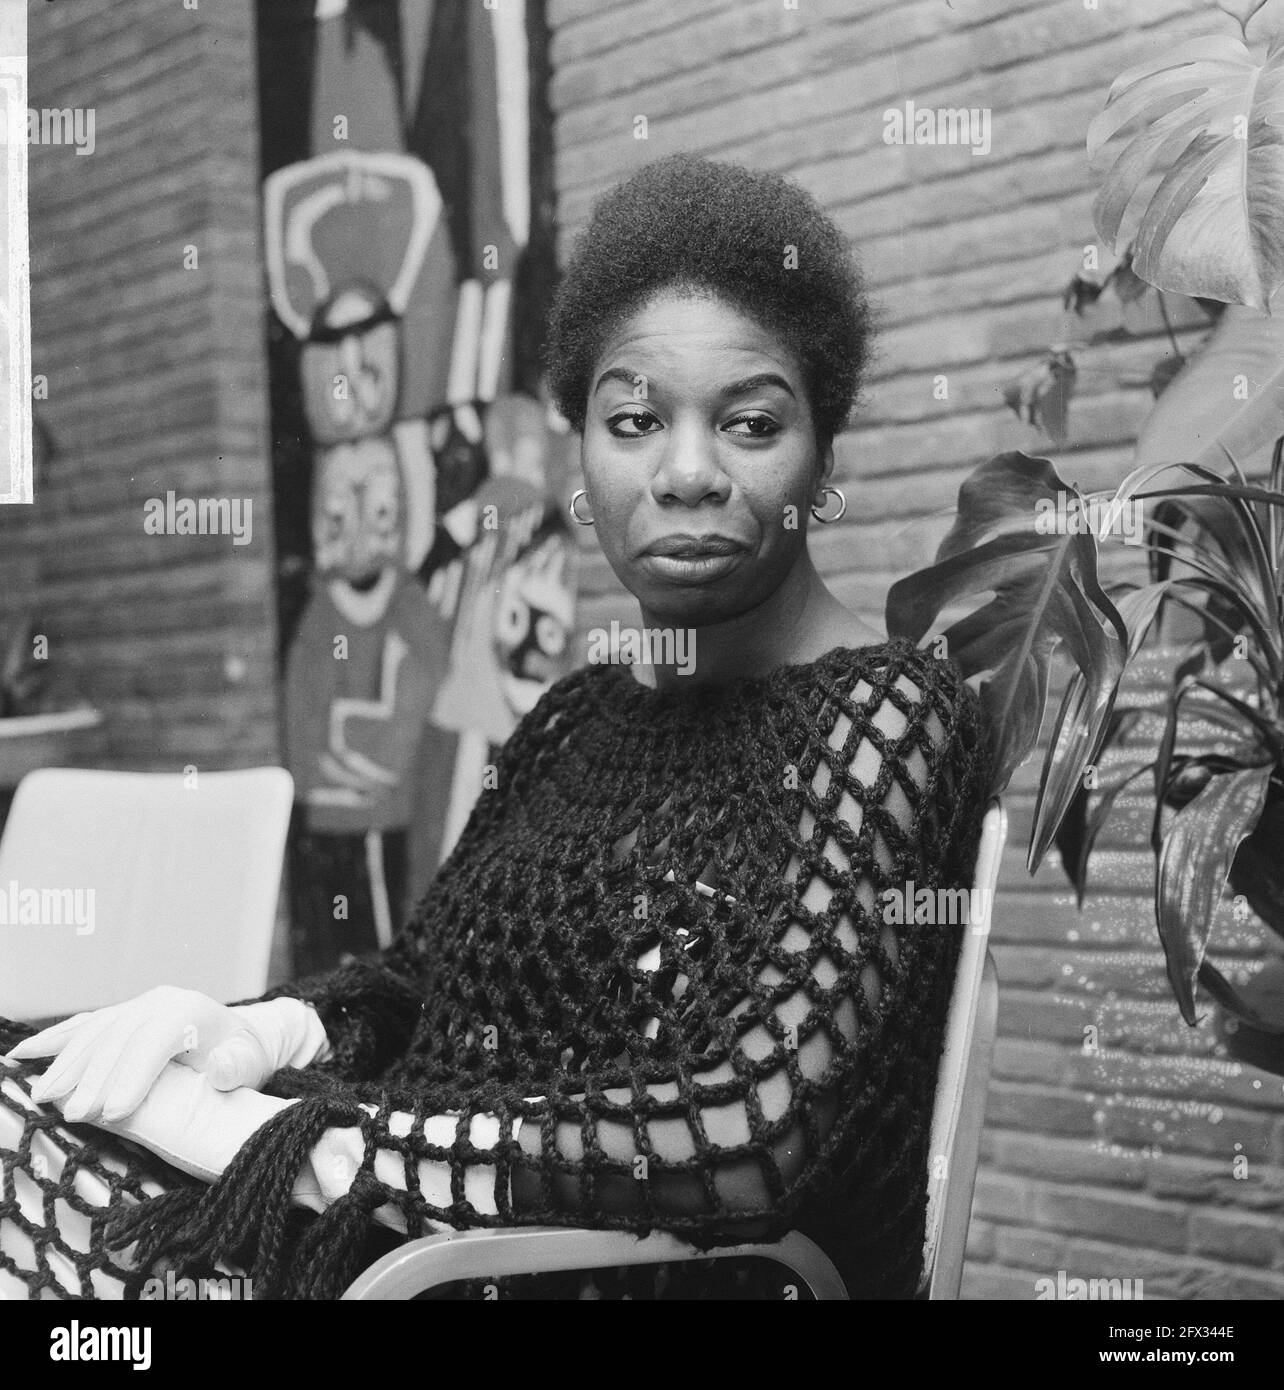 Portrait of American singer Nina Simone to appear on television at Christmas, December 14, 1965, portraits, singers, The Netherlands, 20th century press agency photo, news to remember, documentary, historic photography 1945-1990, visual stories, human history of the Twentieth Century, capturing moments in time Stock Photo